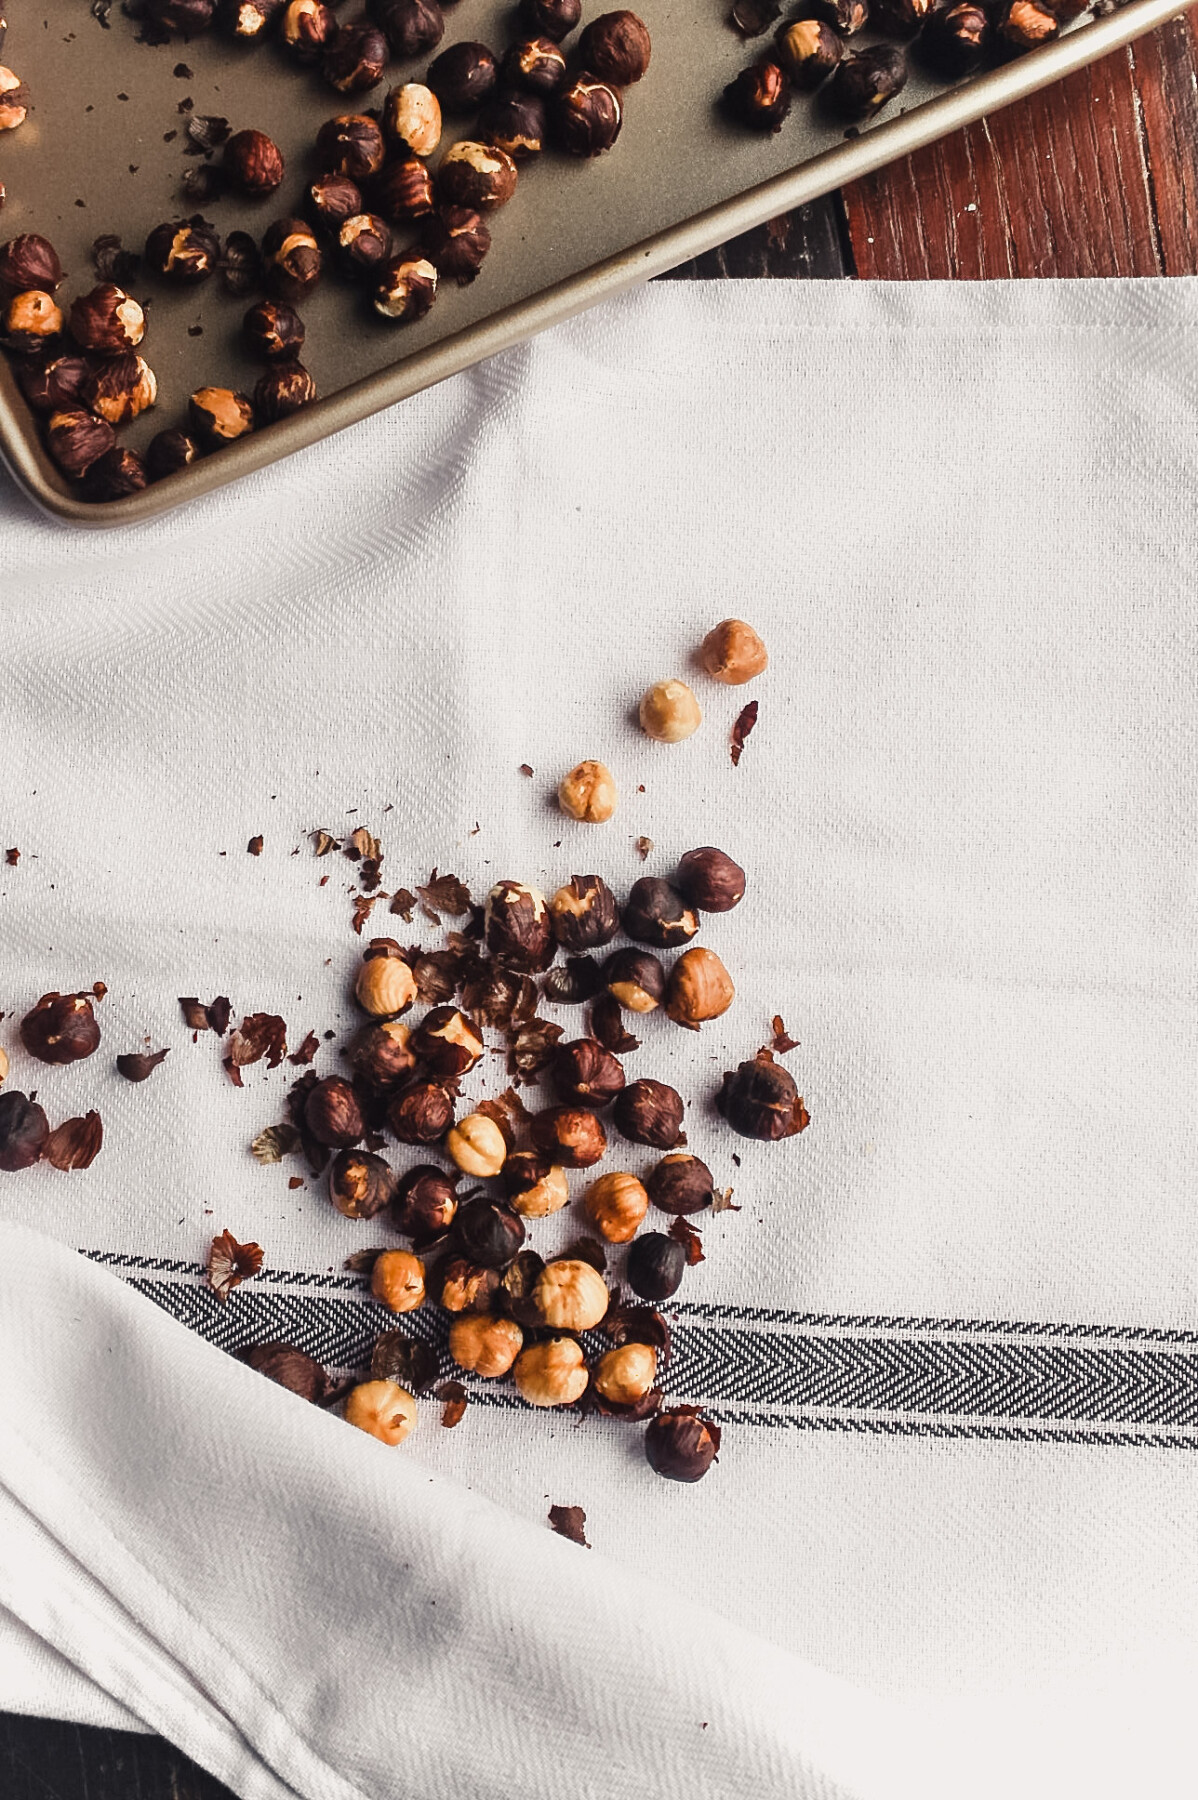 Photograph of toasted hazelnuts laying on a white kitchen towel